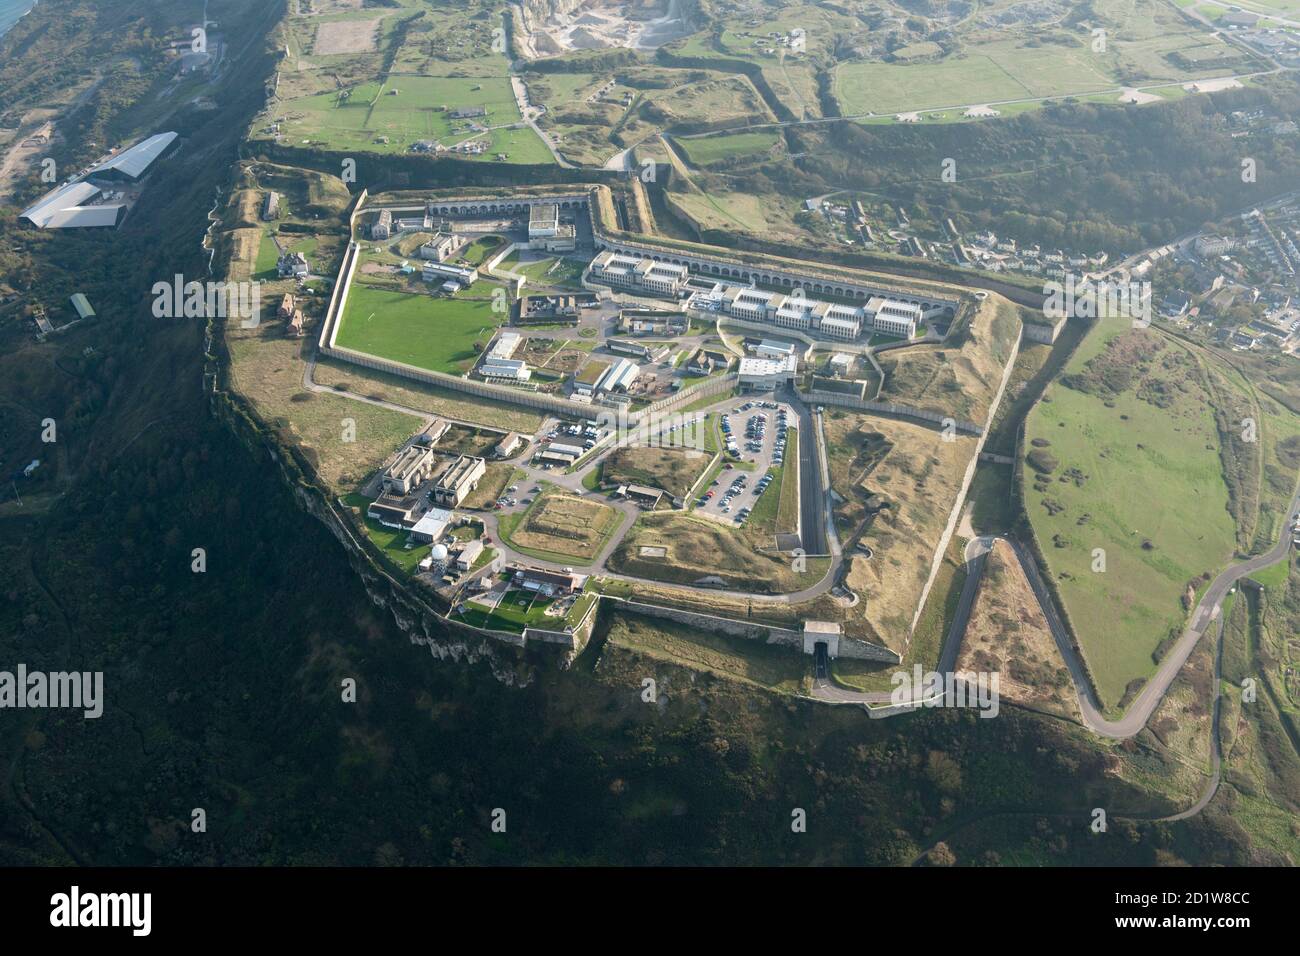 The Verne Citadel, coastal battery constructed between 1857-1881 and then prison (HMP Verne) which was an Immigration Removal Centre between 2013-17, Portland, Dorset. Aerial view. Stock Photo